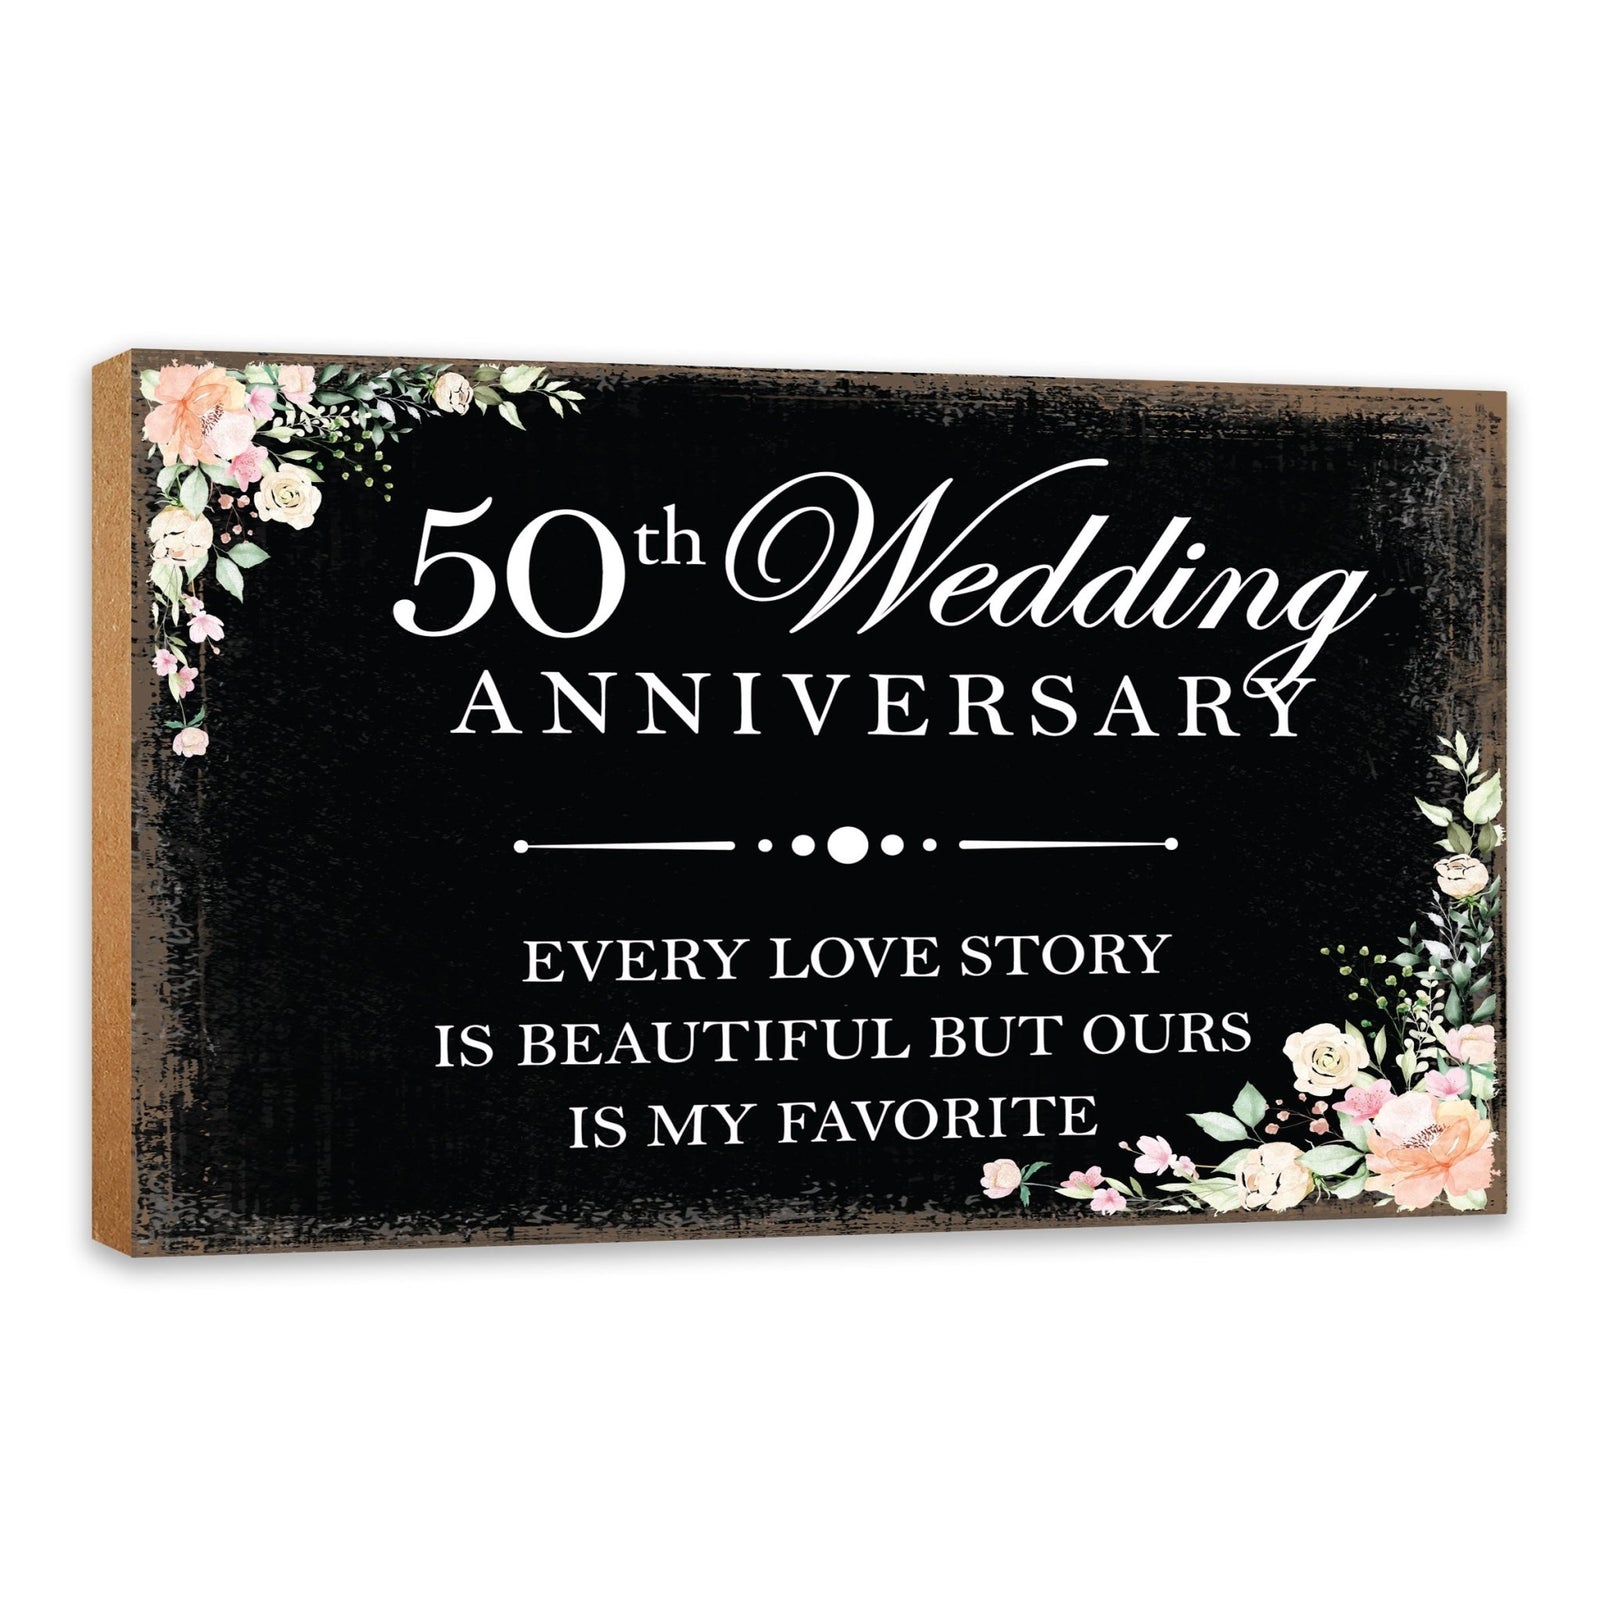 50th Wedding Anniversary Unique Shelf Decor and Tabletop Signs Gifts for Couples - Every Love Story - LifeSong Milestones